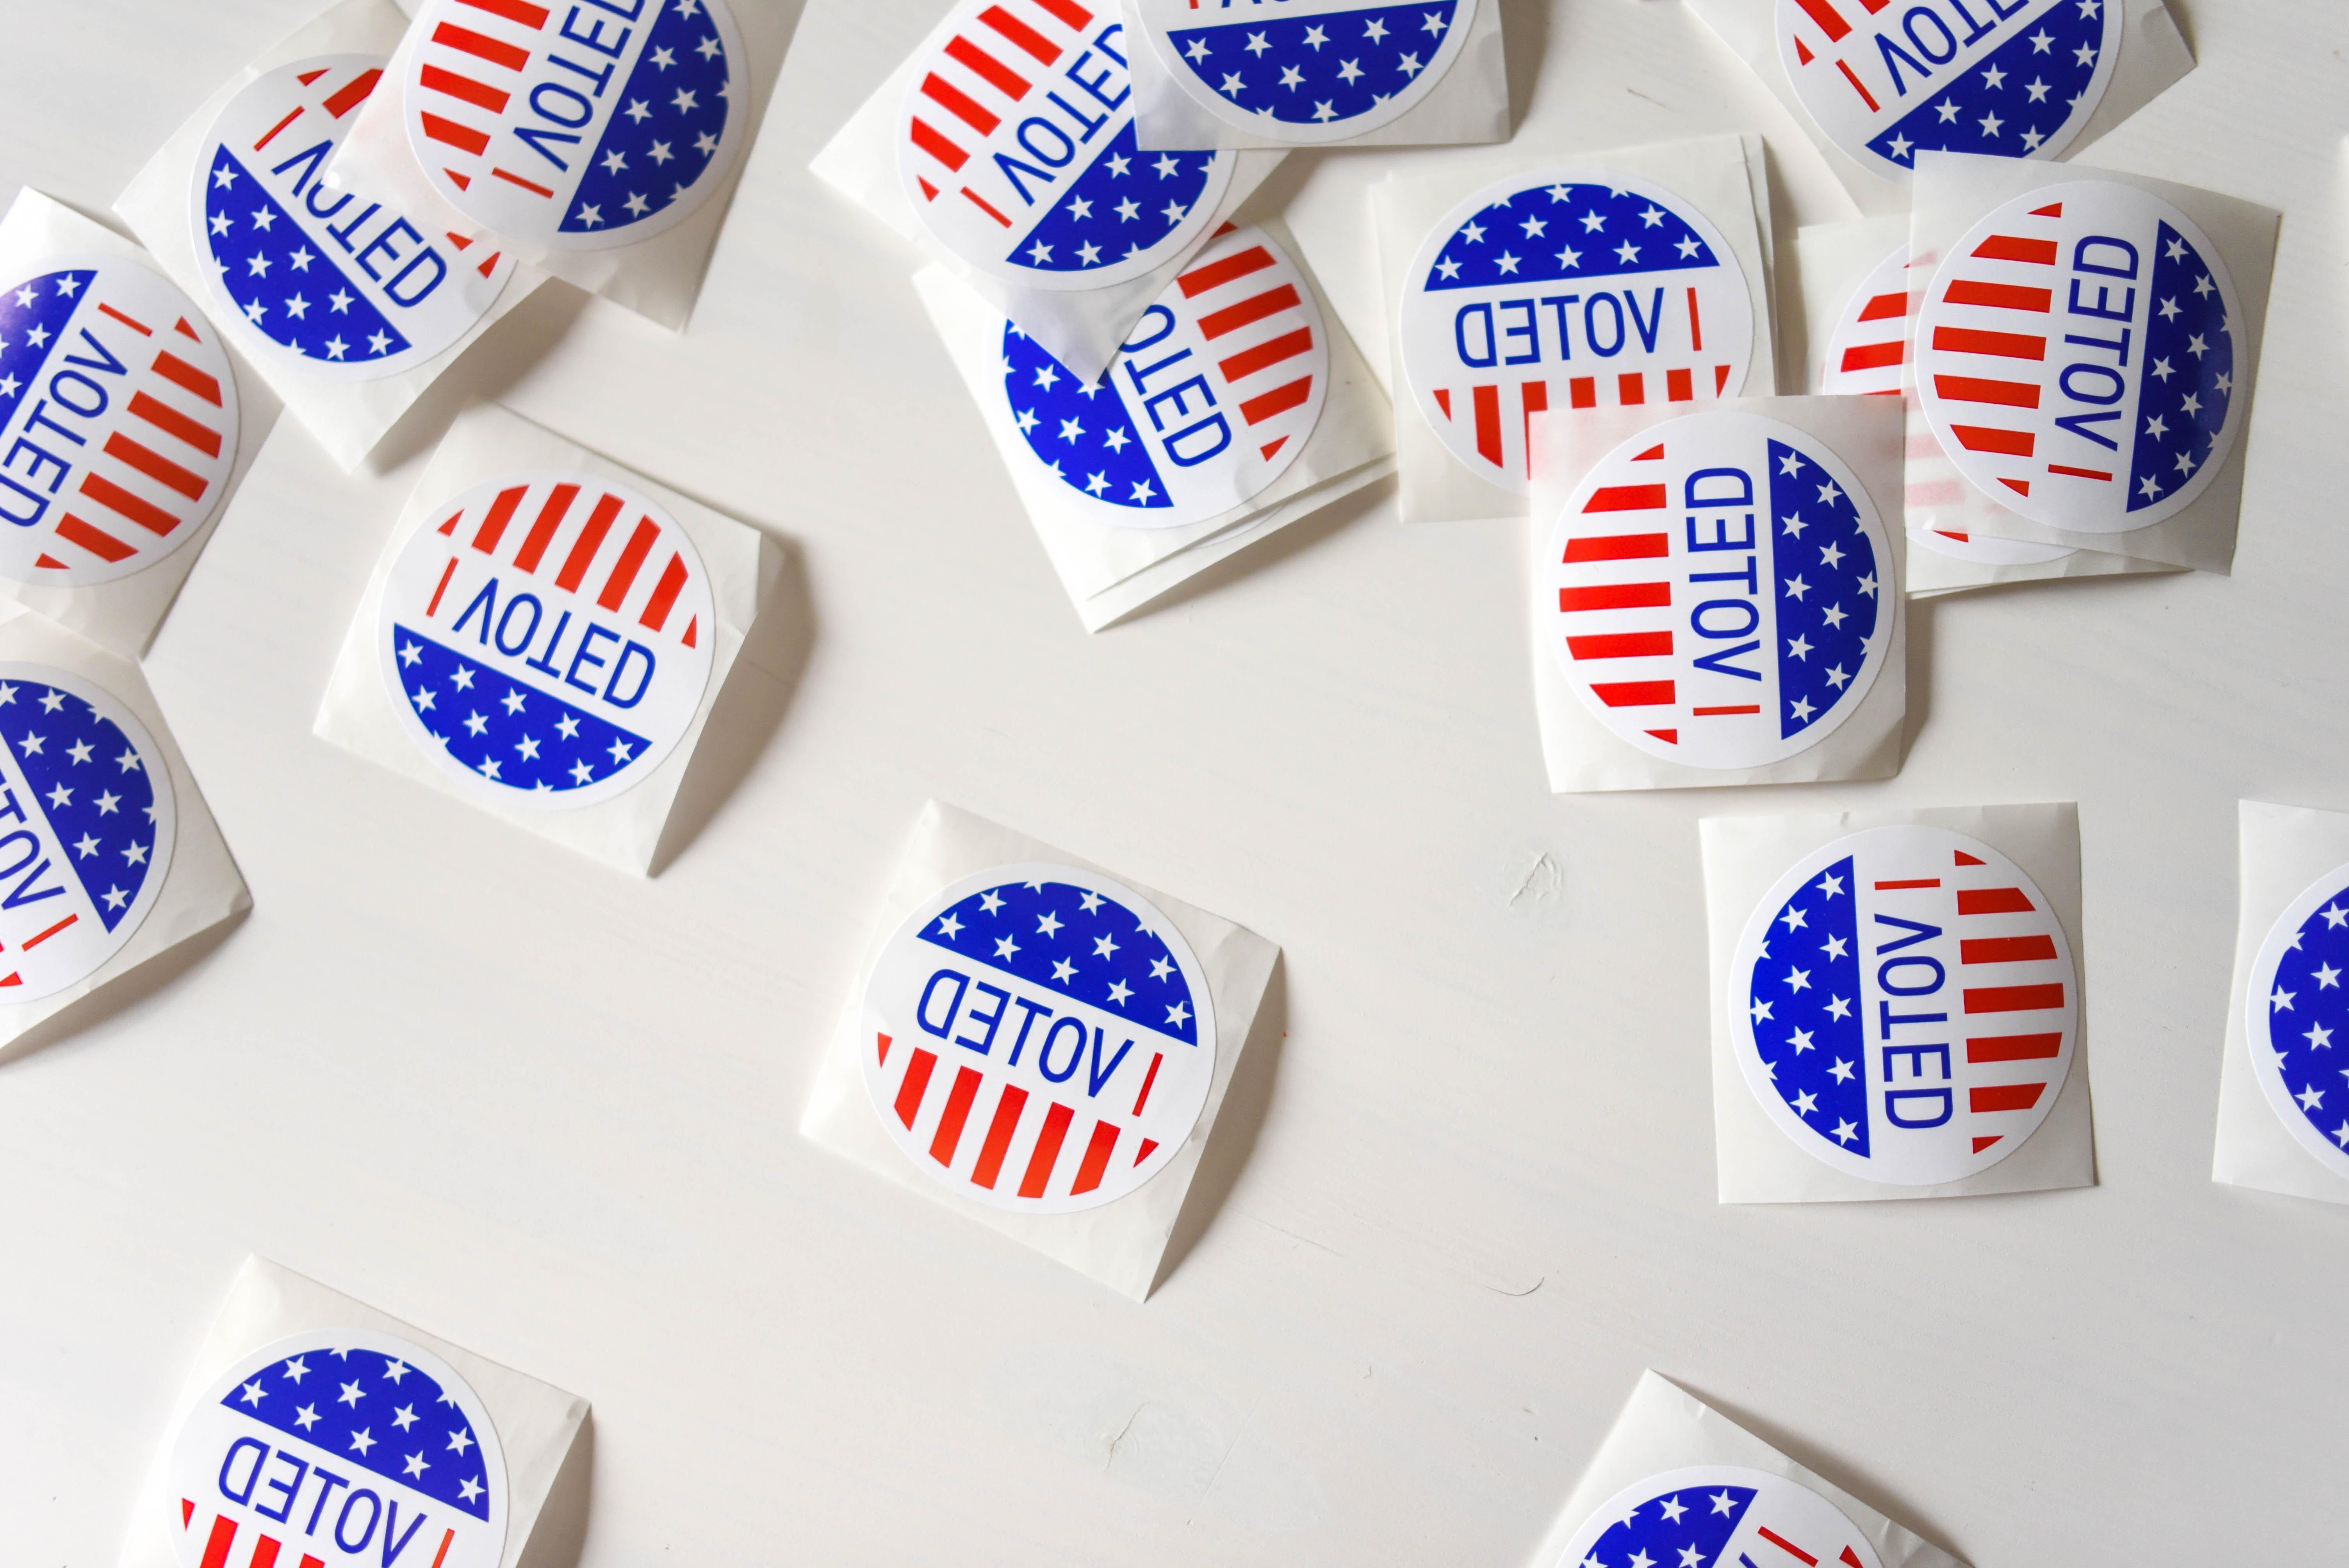 Voted printed stickers